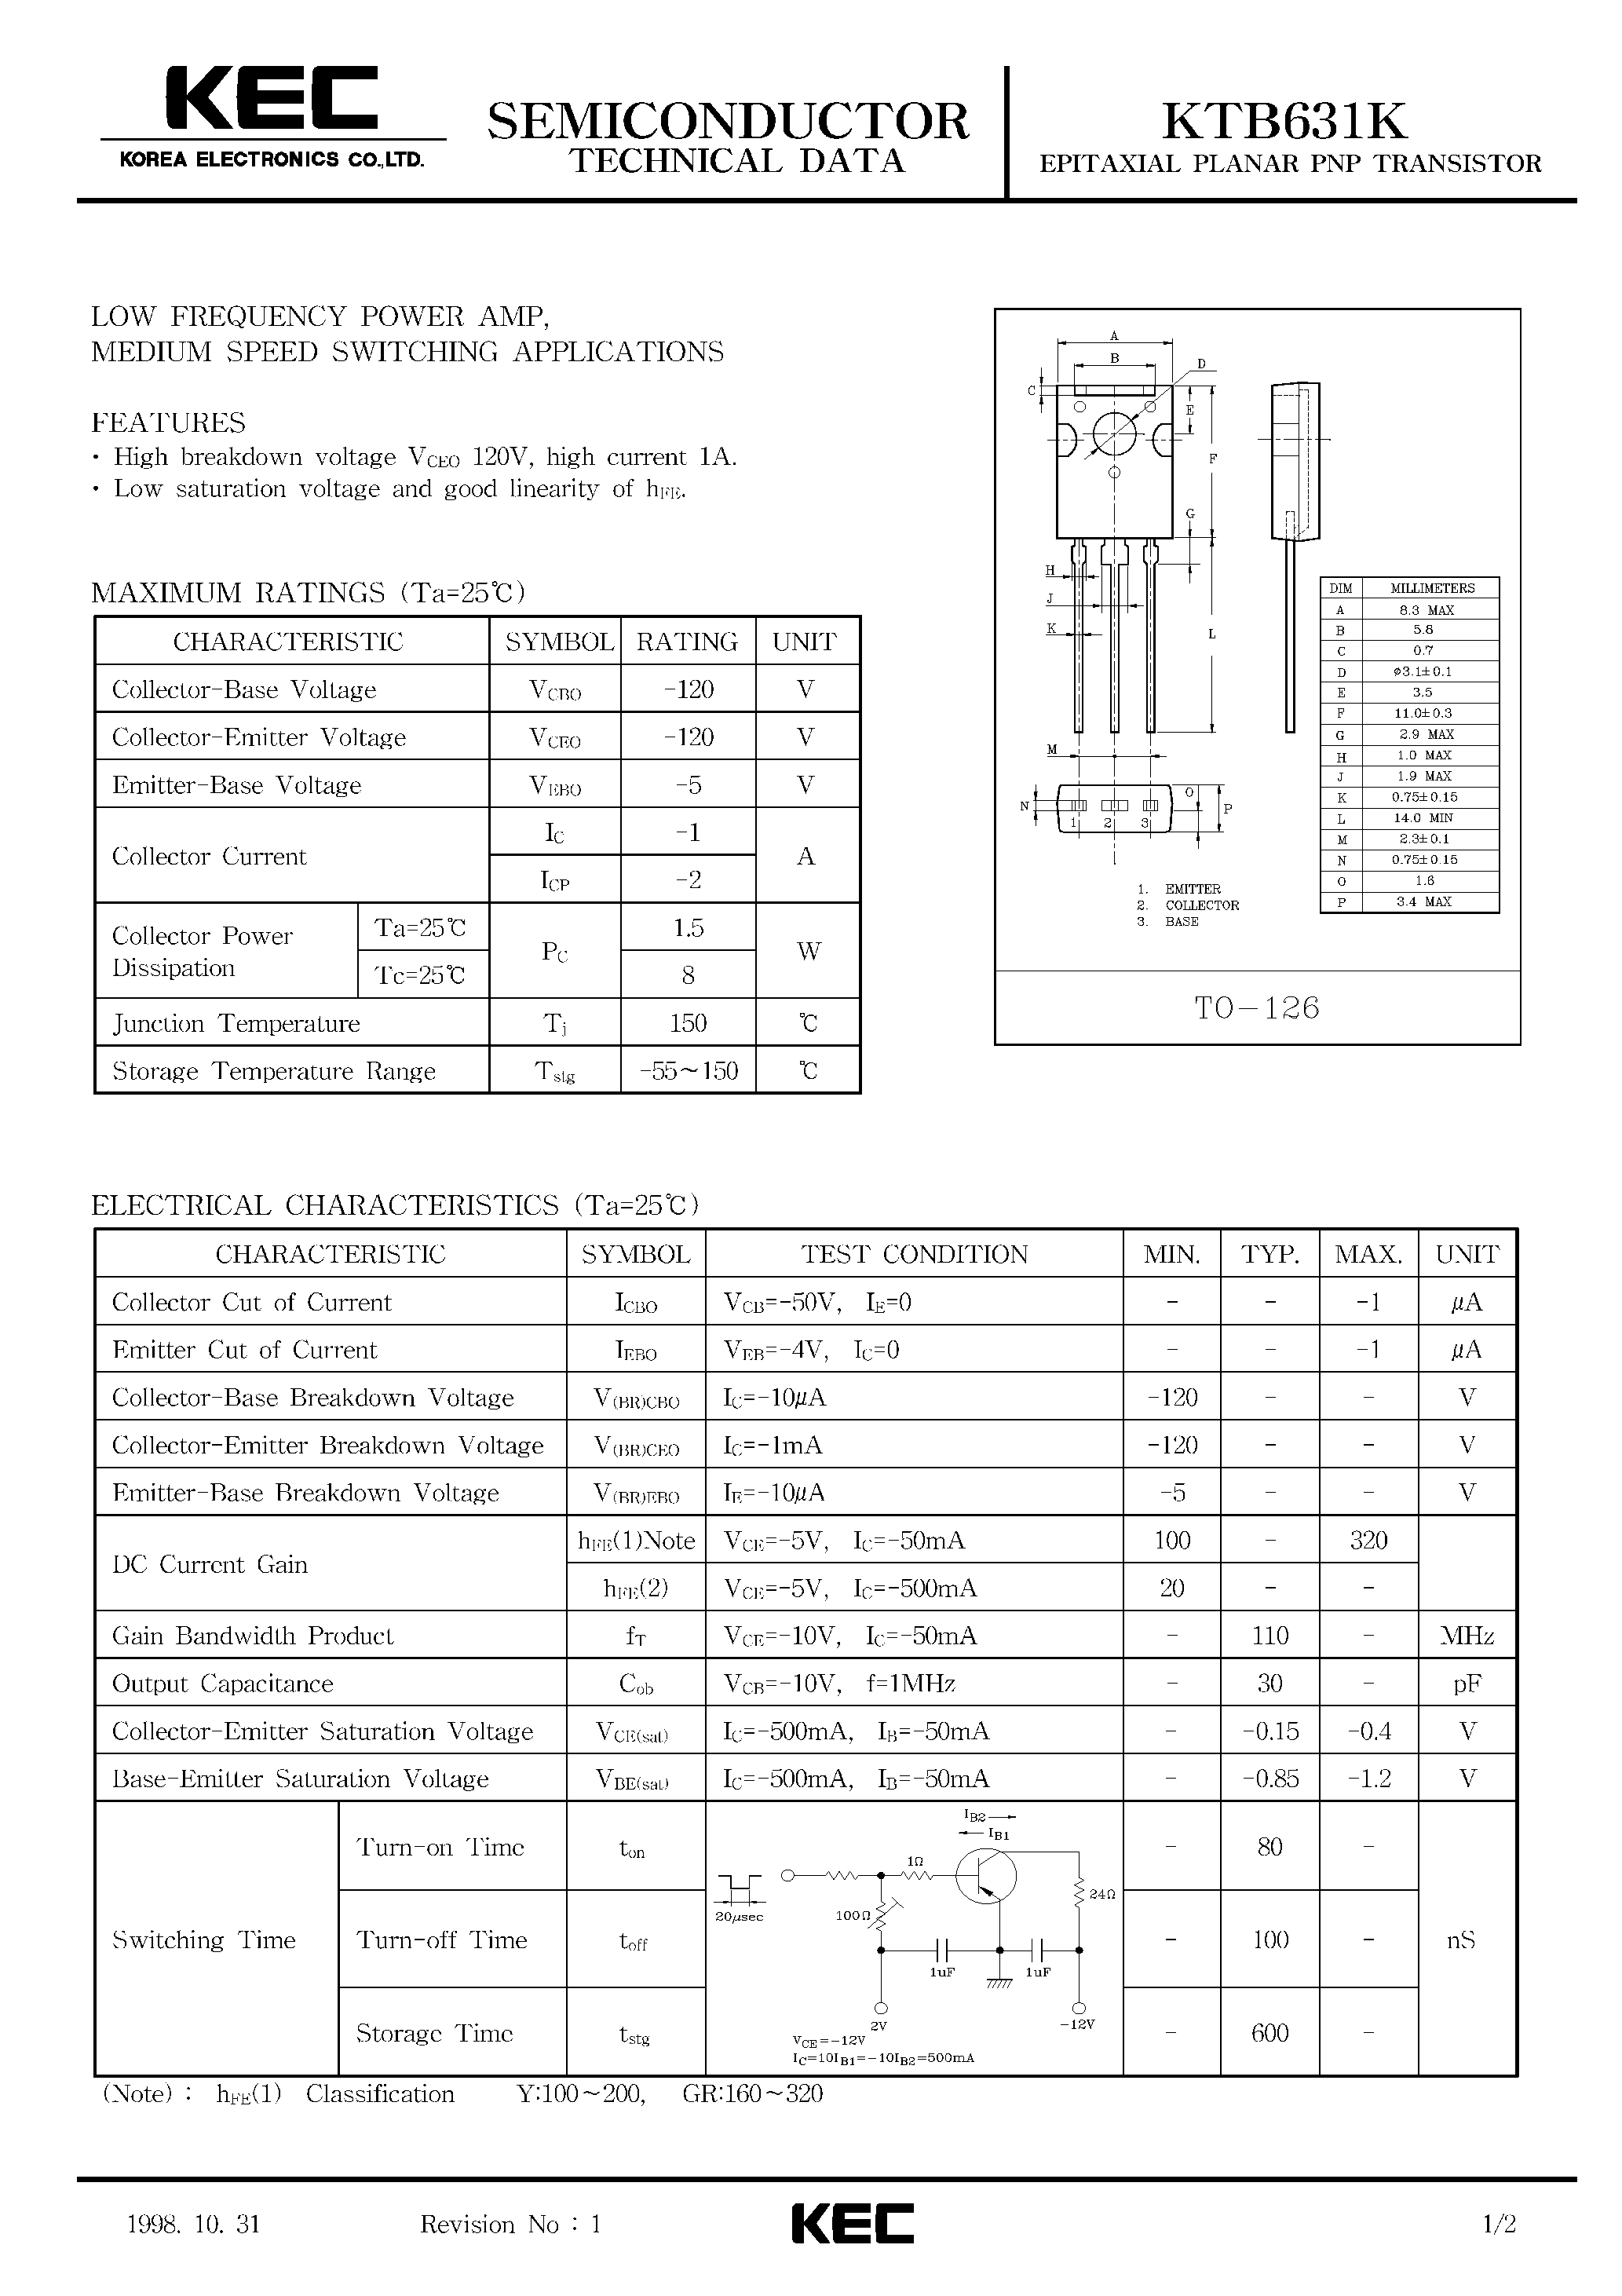 Даташит KTB631K - EPITAXIAL PLANAR PNP TRANSISTOR (LOW FREQUENCY POWER AMP/ MEDIUM SPEED SWITCHING) страница 1